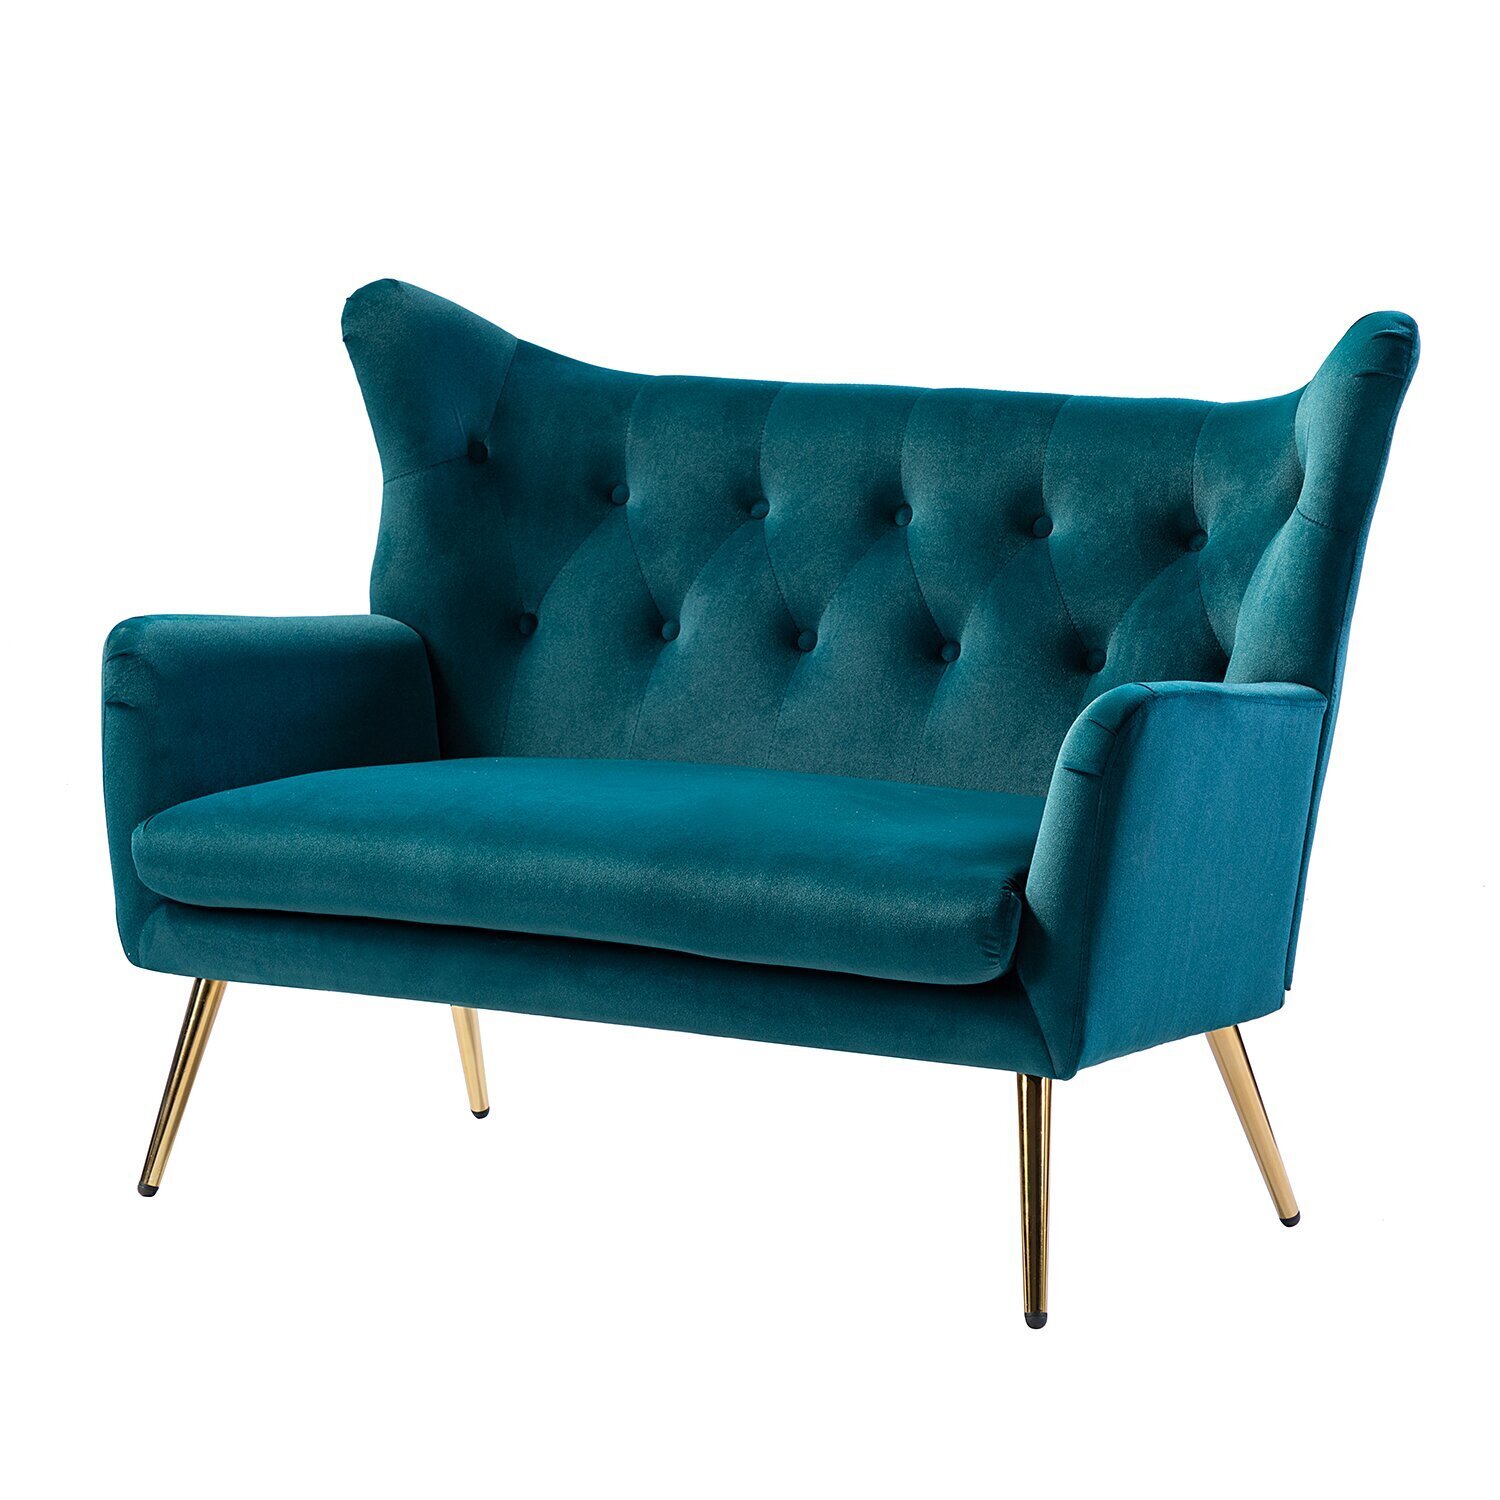 Teal Velvet Couch with Wing Back